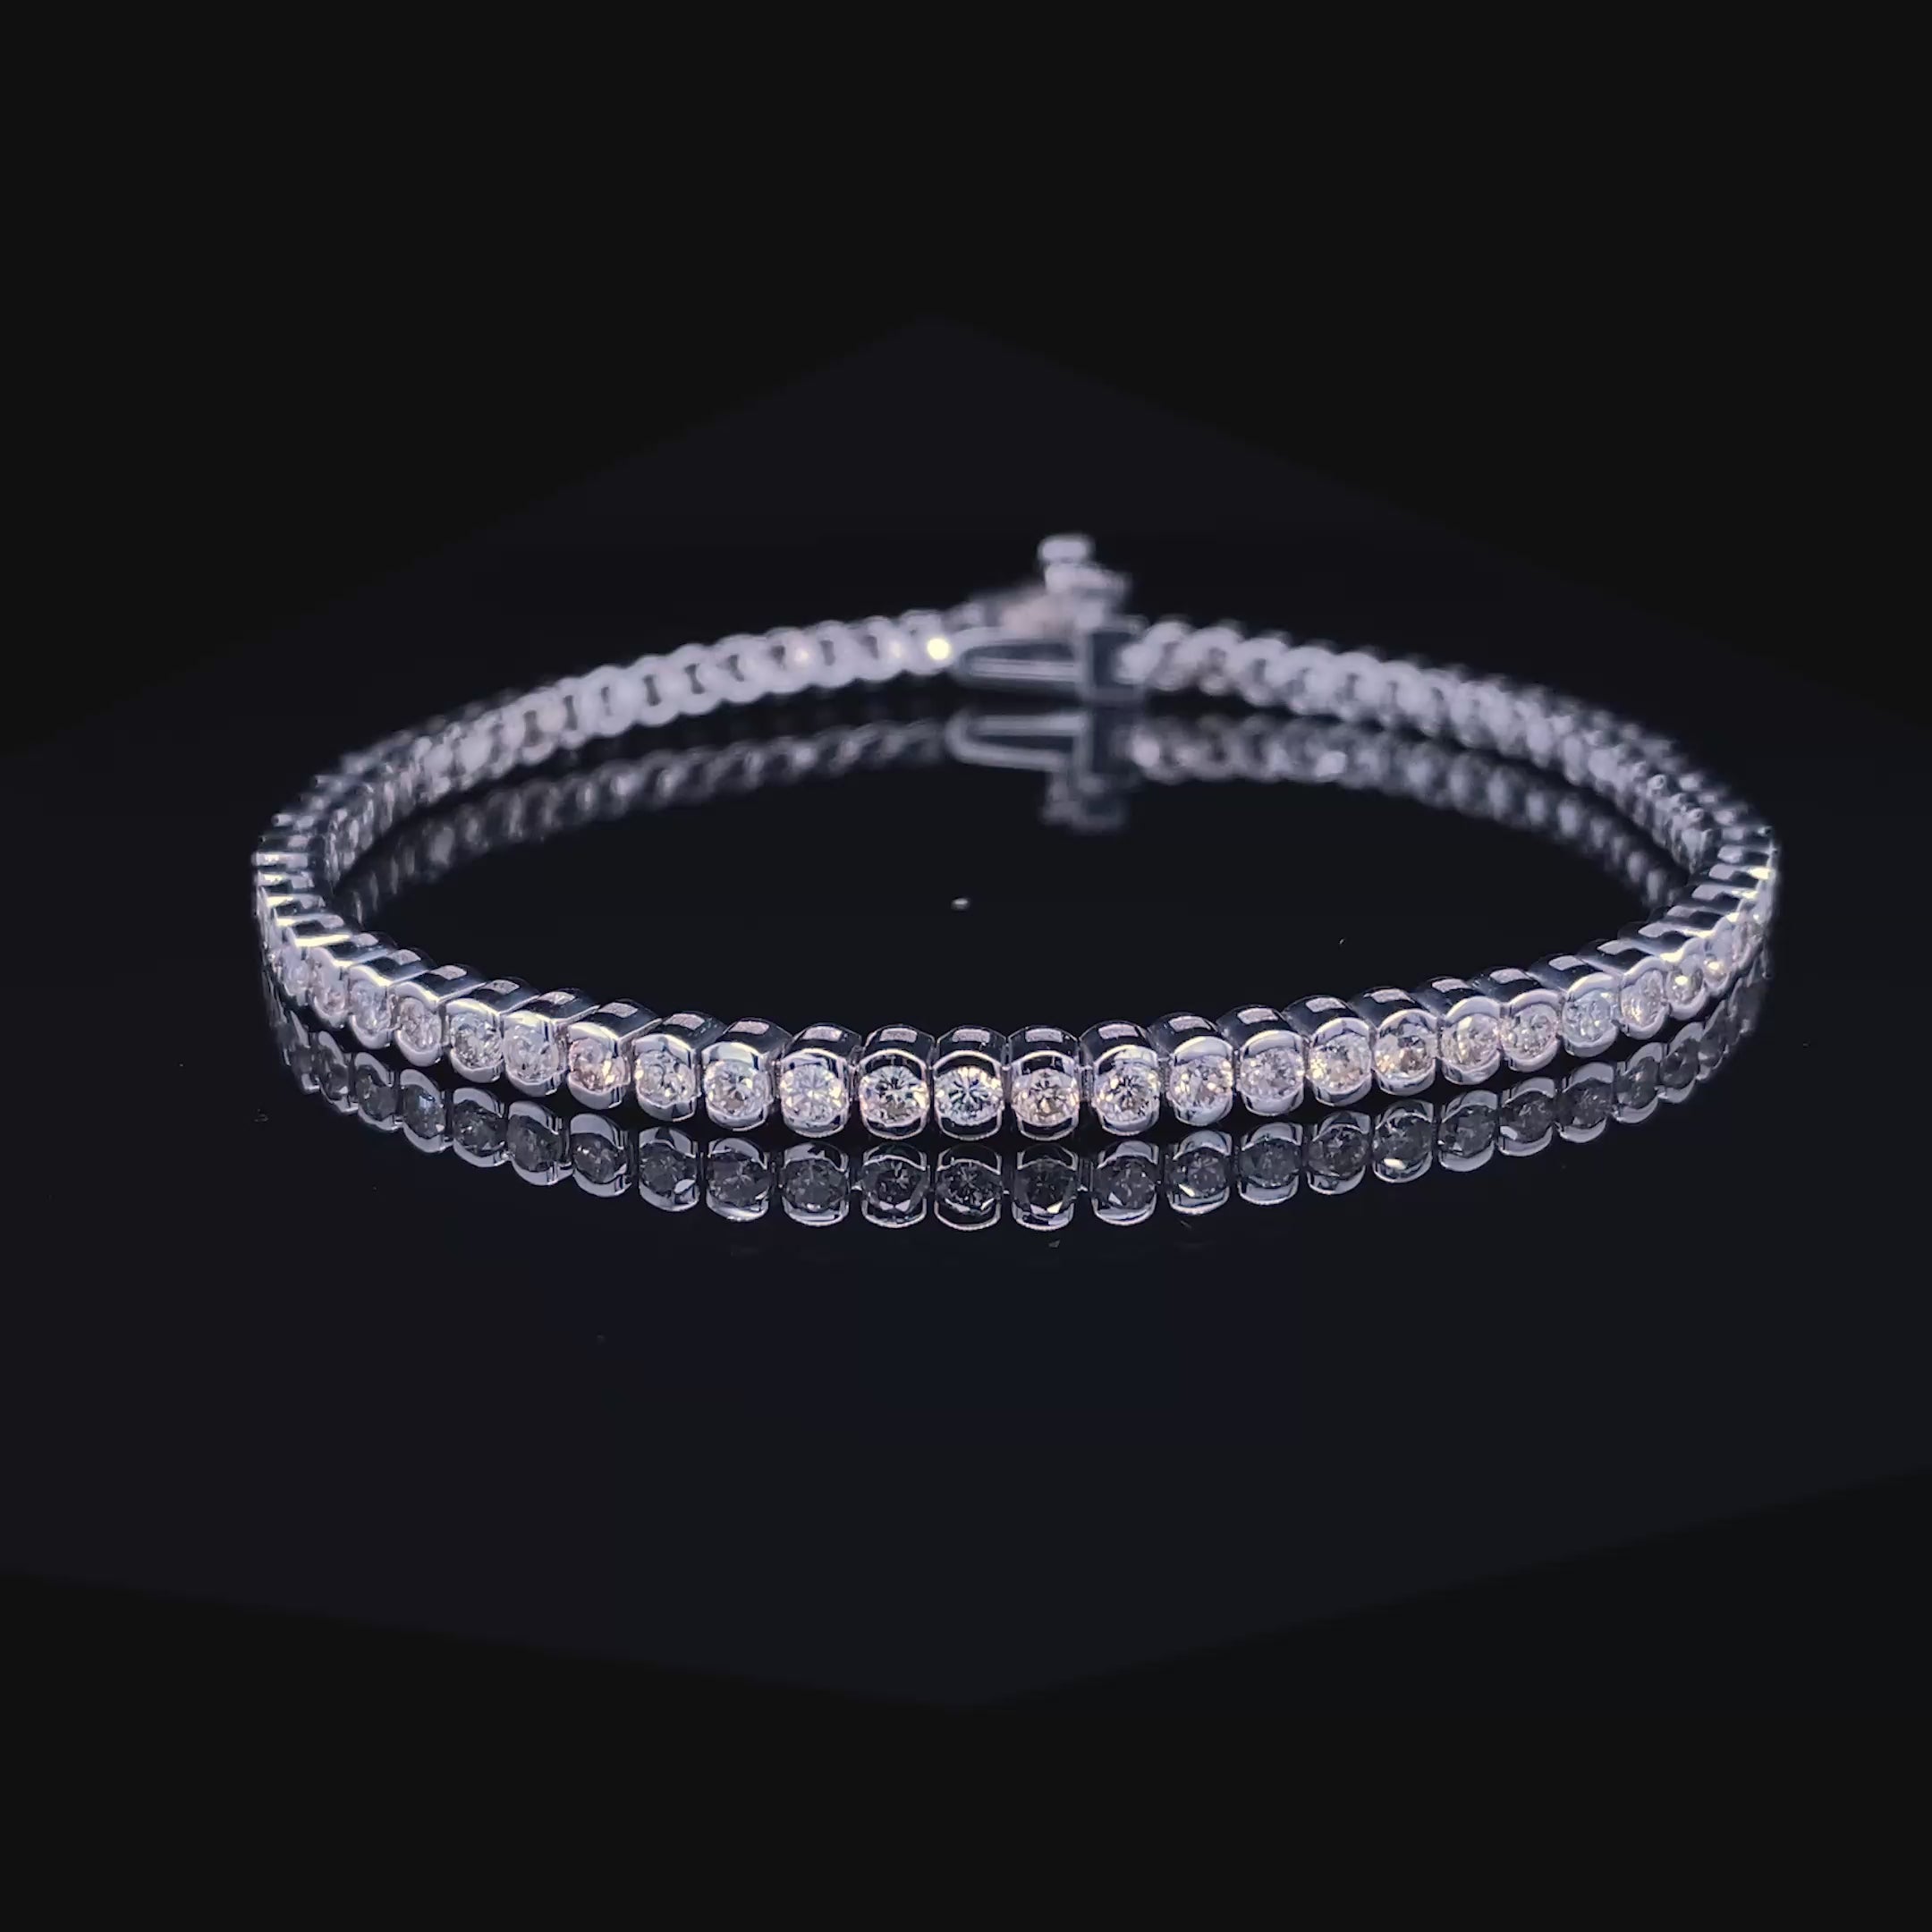 Sophisticated 3.50CT Round Cut Diamond Tennis Bracelet in 14KT White Gold